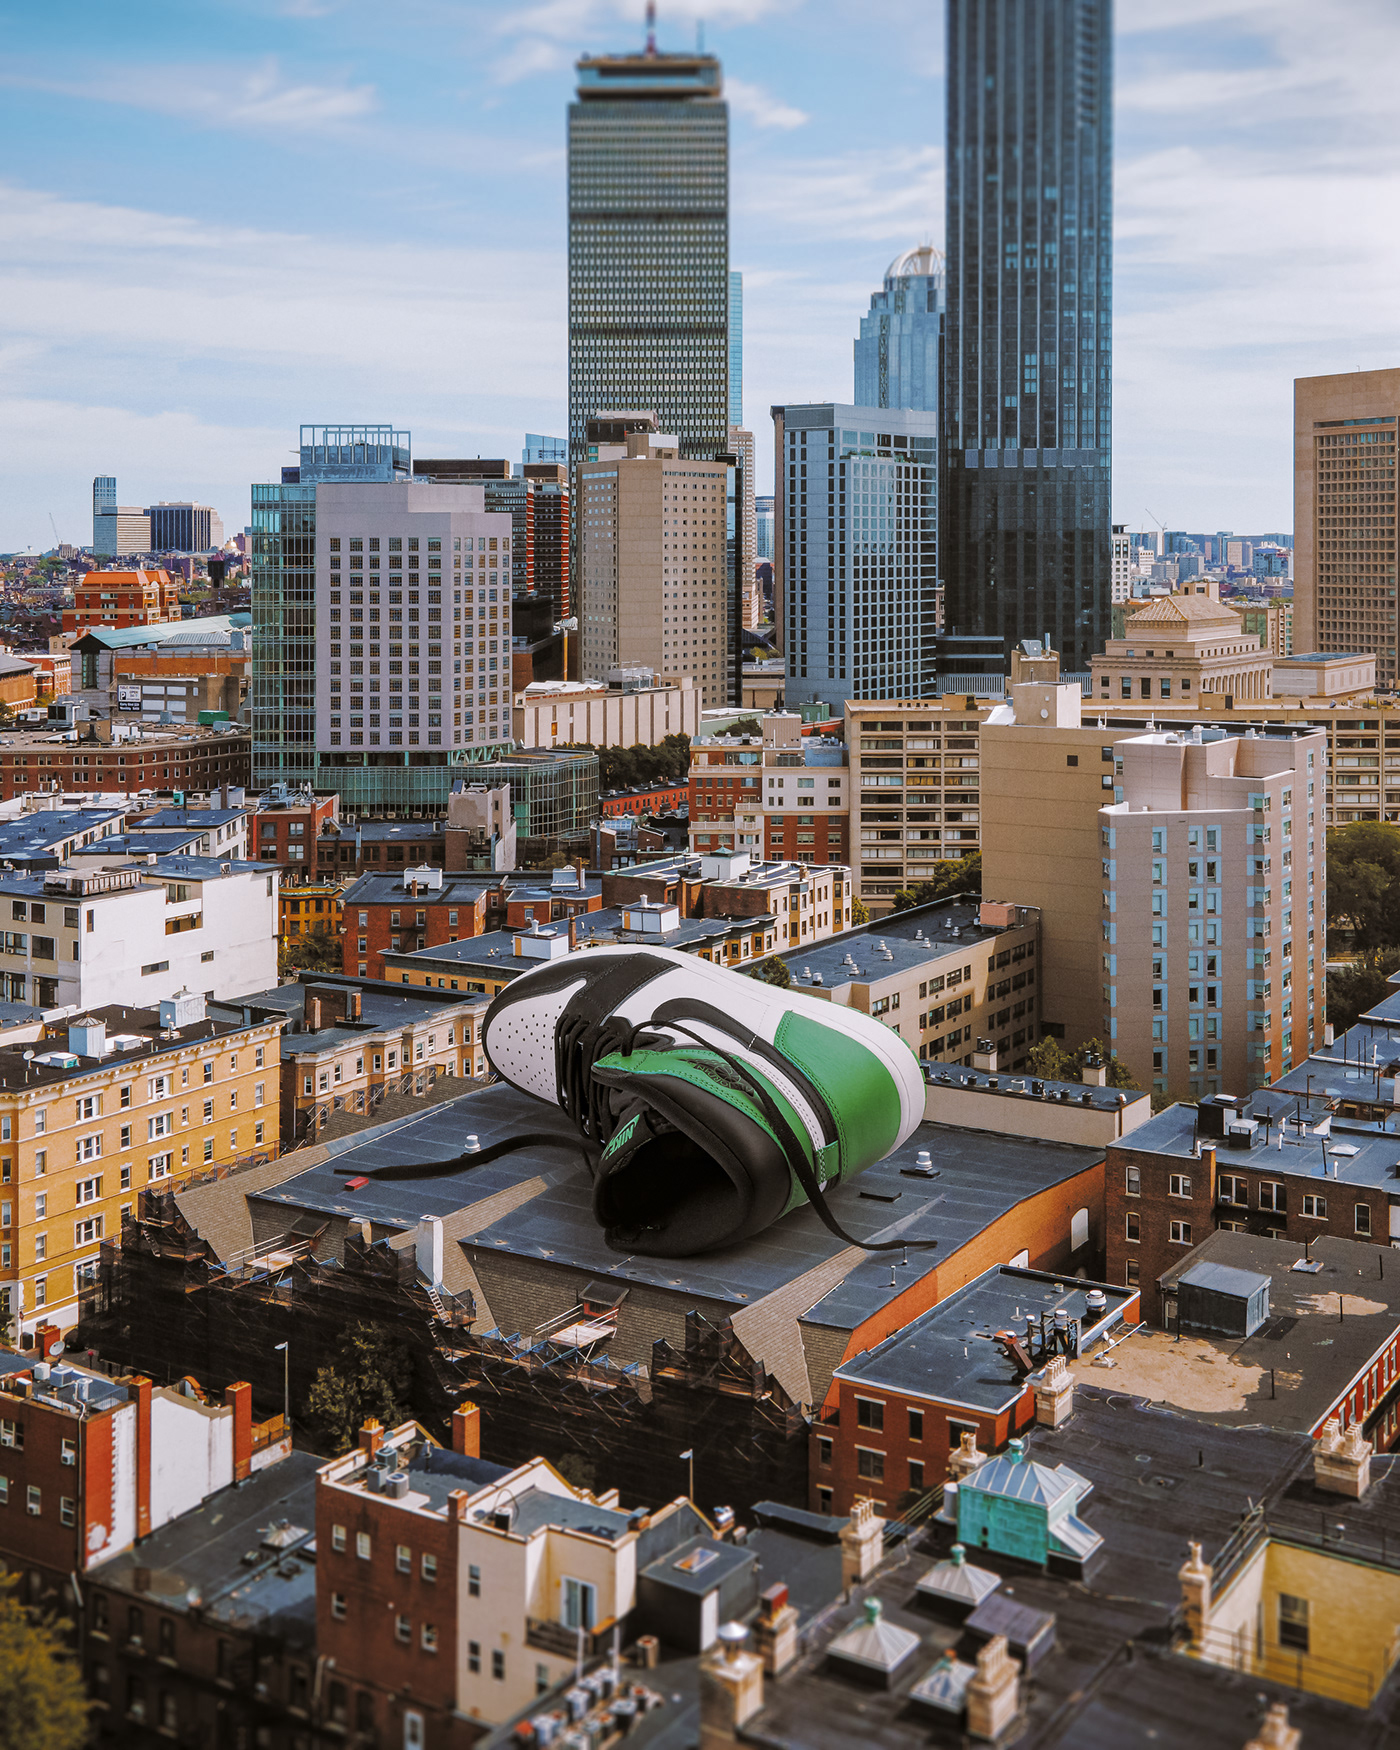 Photo composite of giant sneaker on top of buildings. Retouching using Photoshop